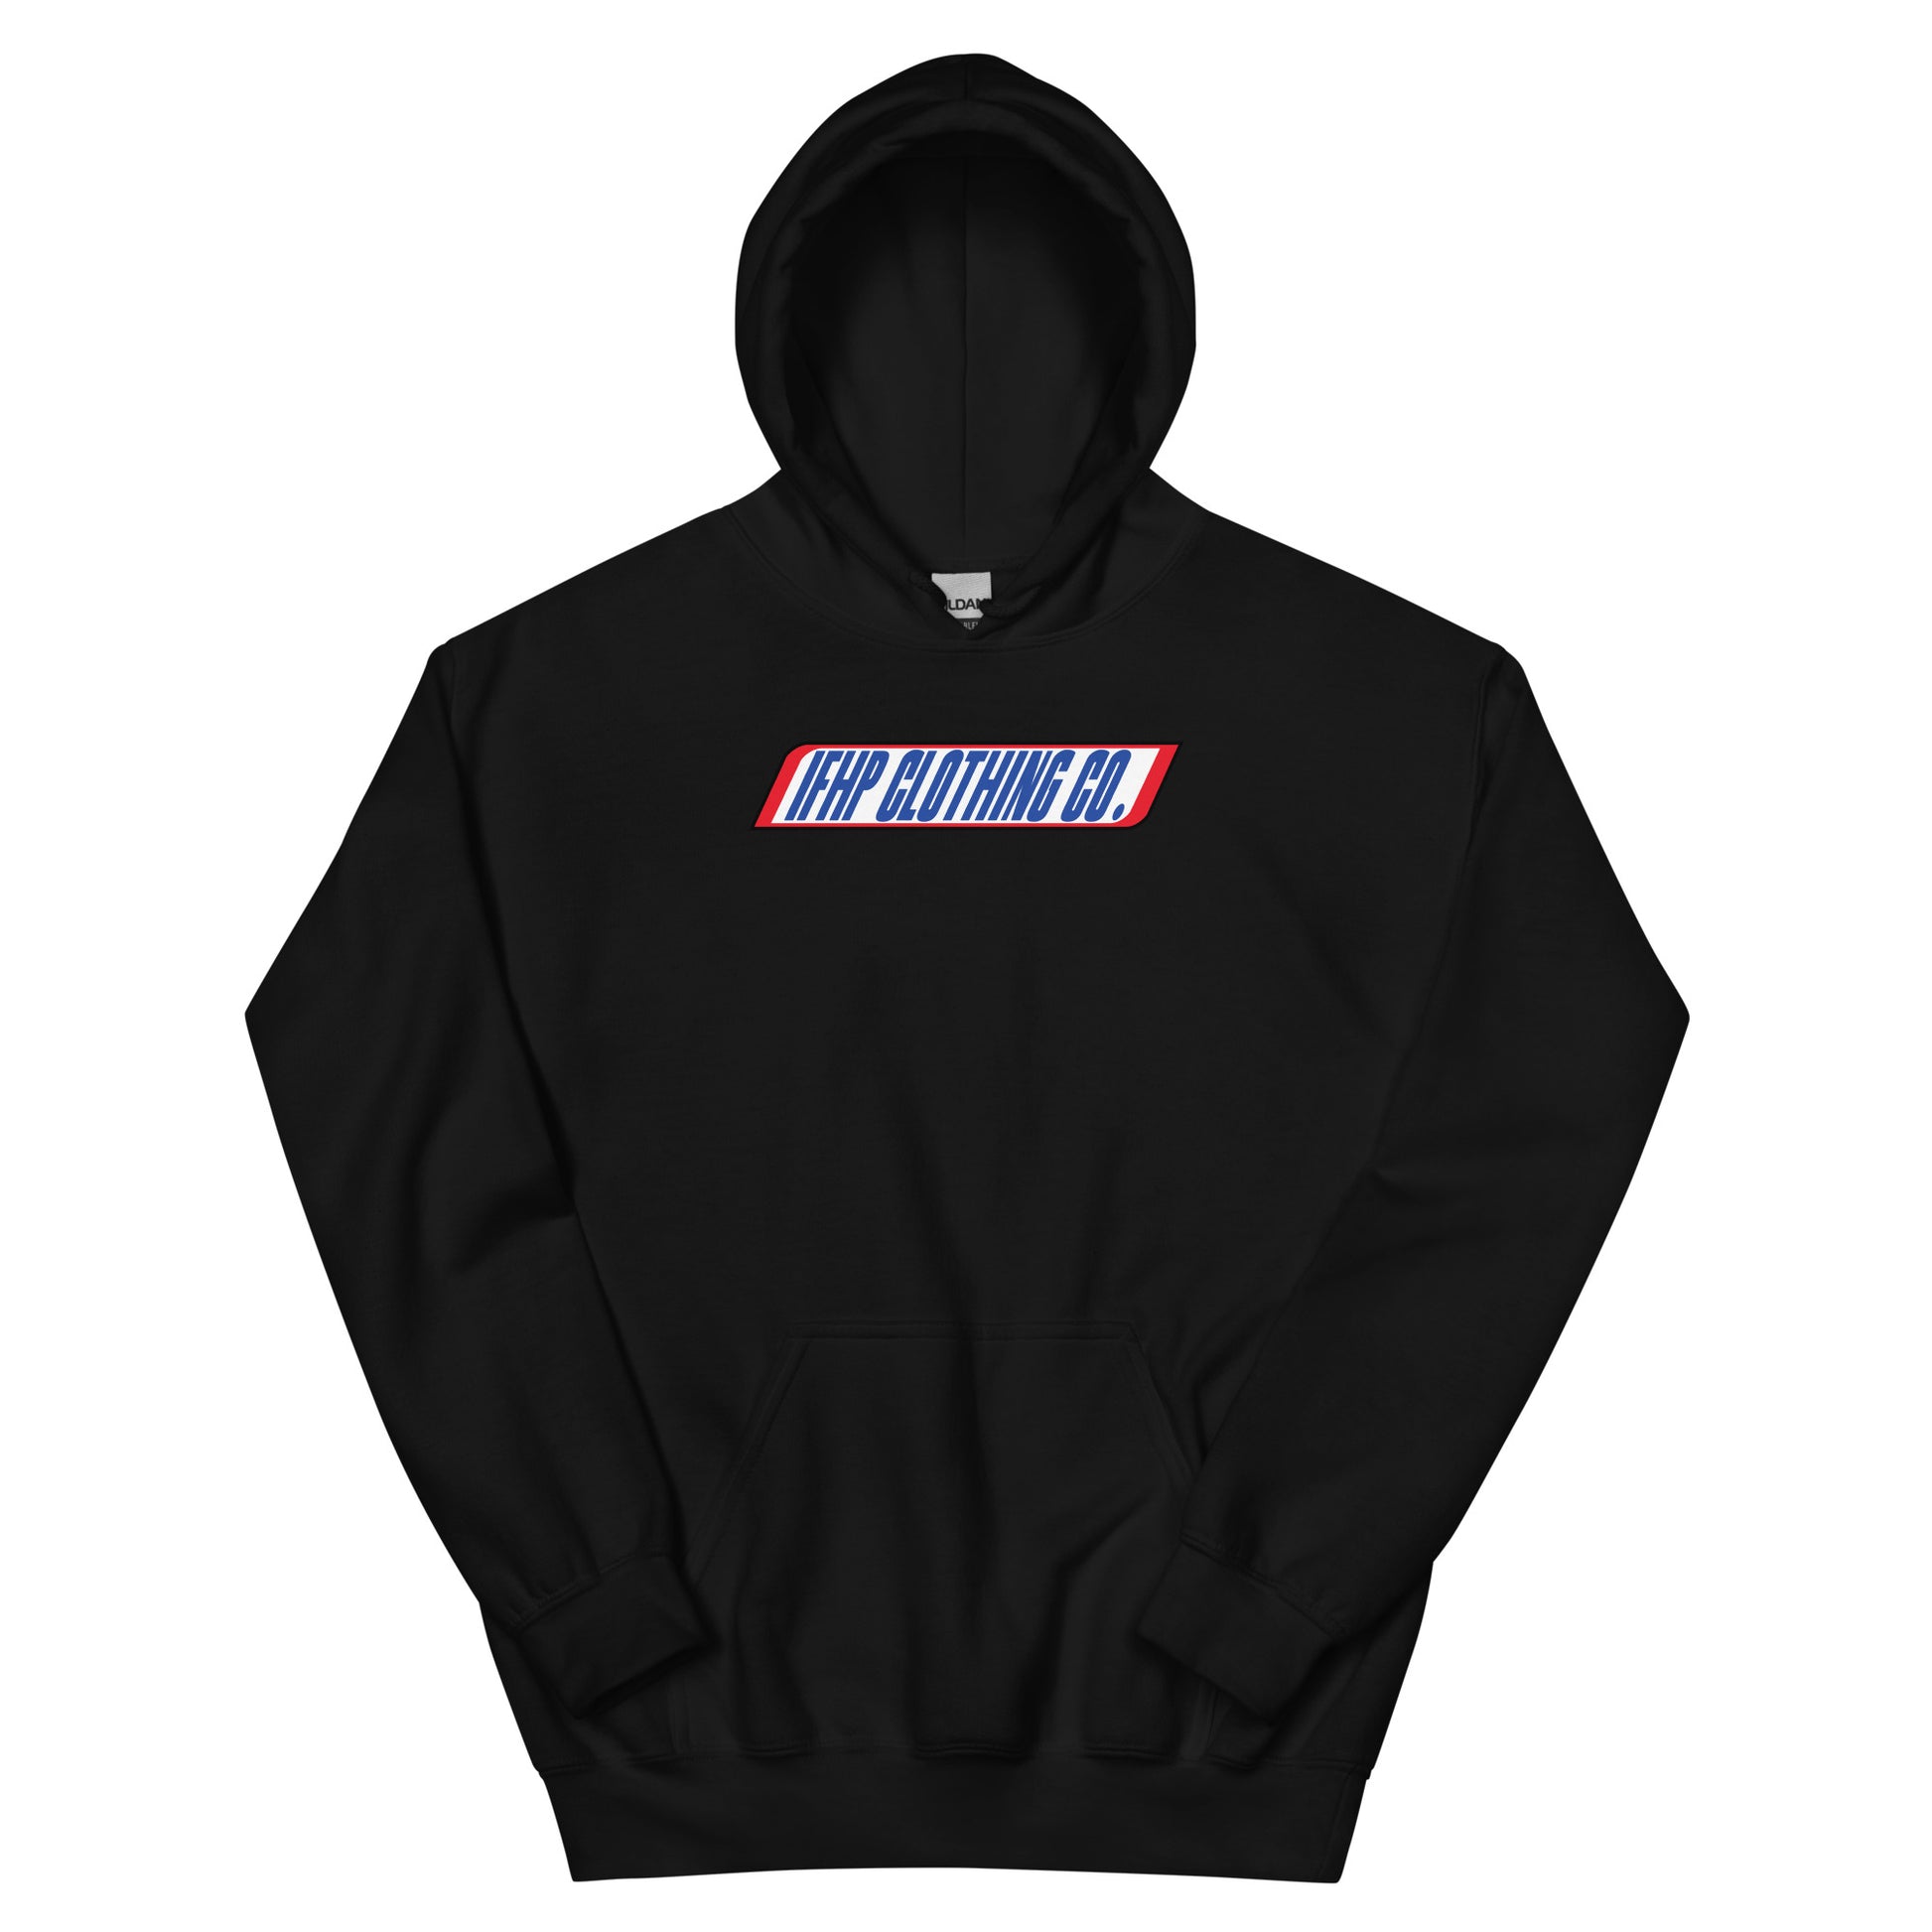 Who Doesn't Like Candy? Hoodie Black Front